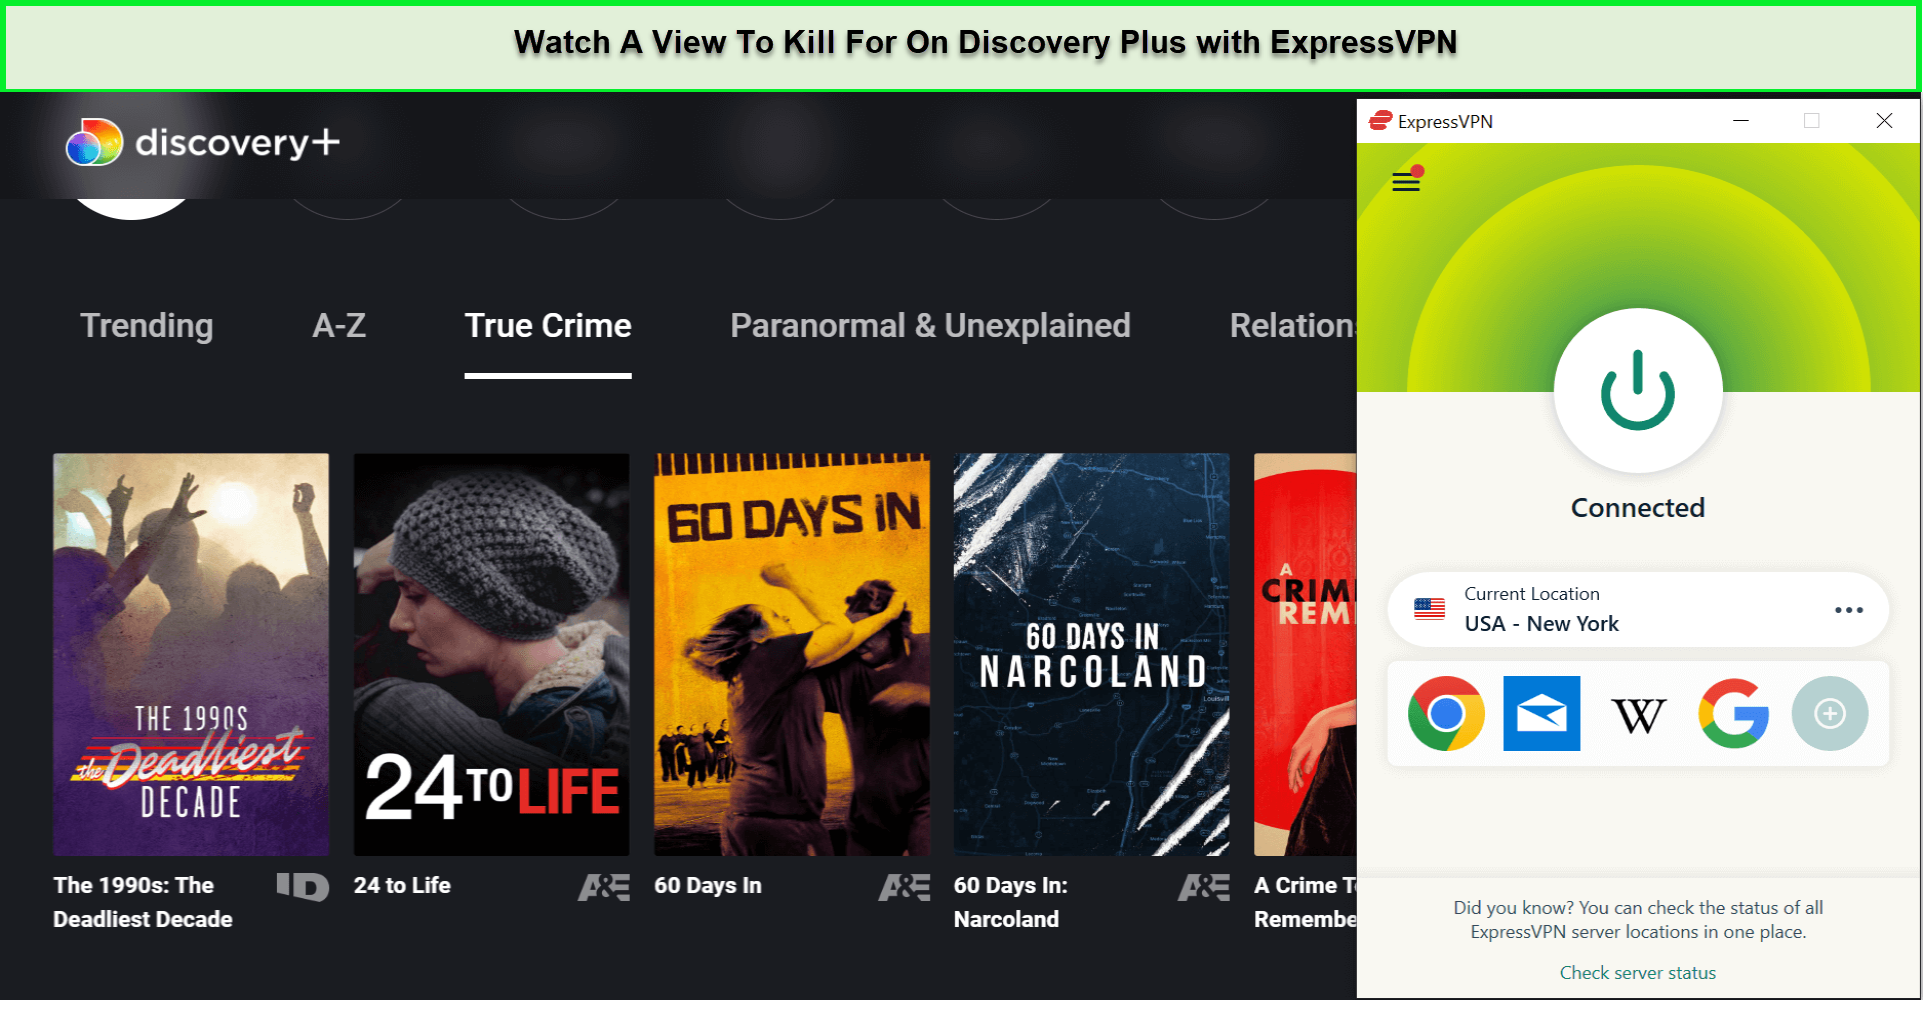 Watch-A-View-To-Kill-For-in-France-On-Discovery-Plus-with-ExpressVPN